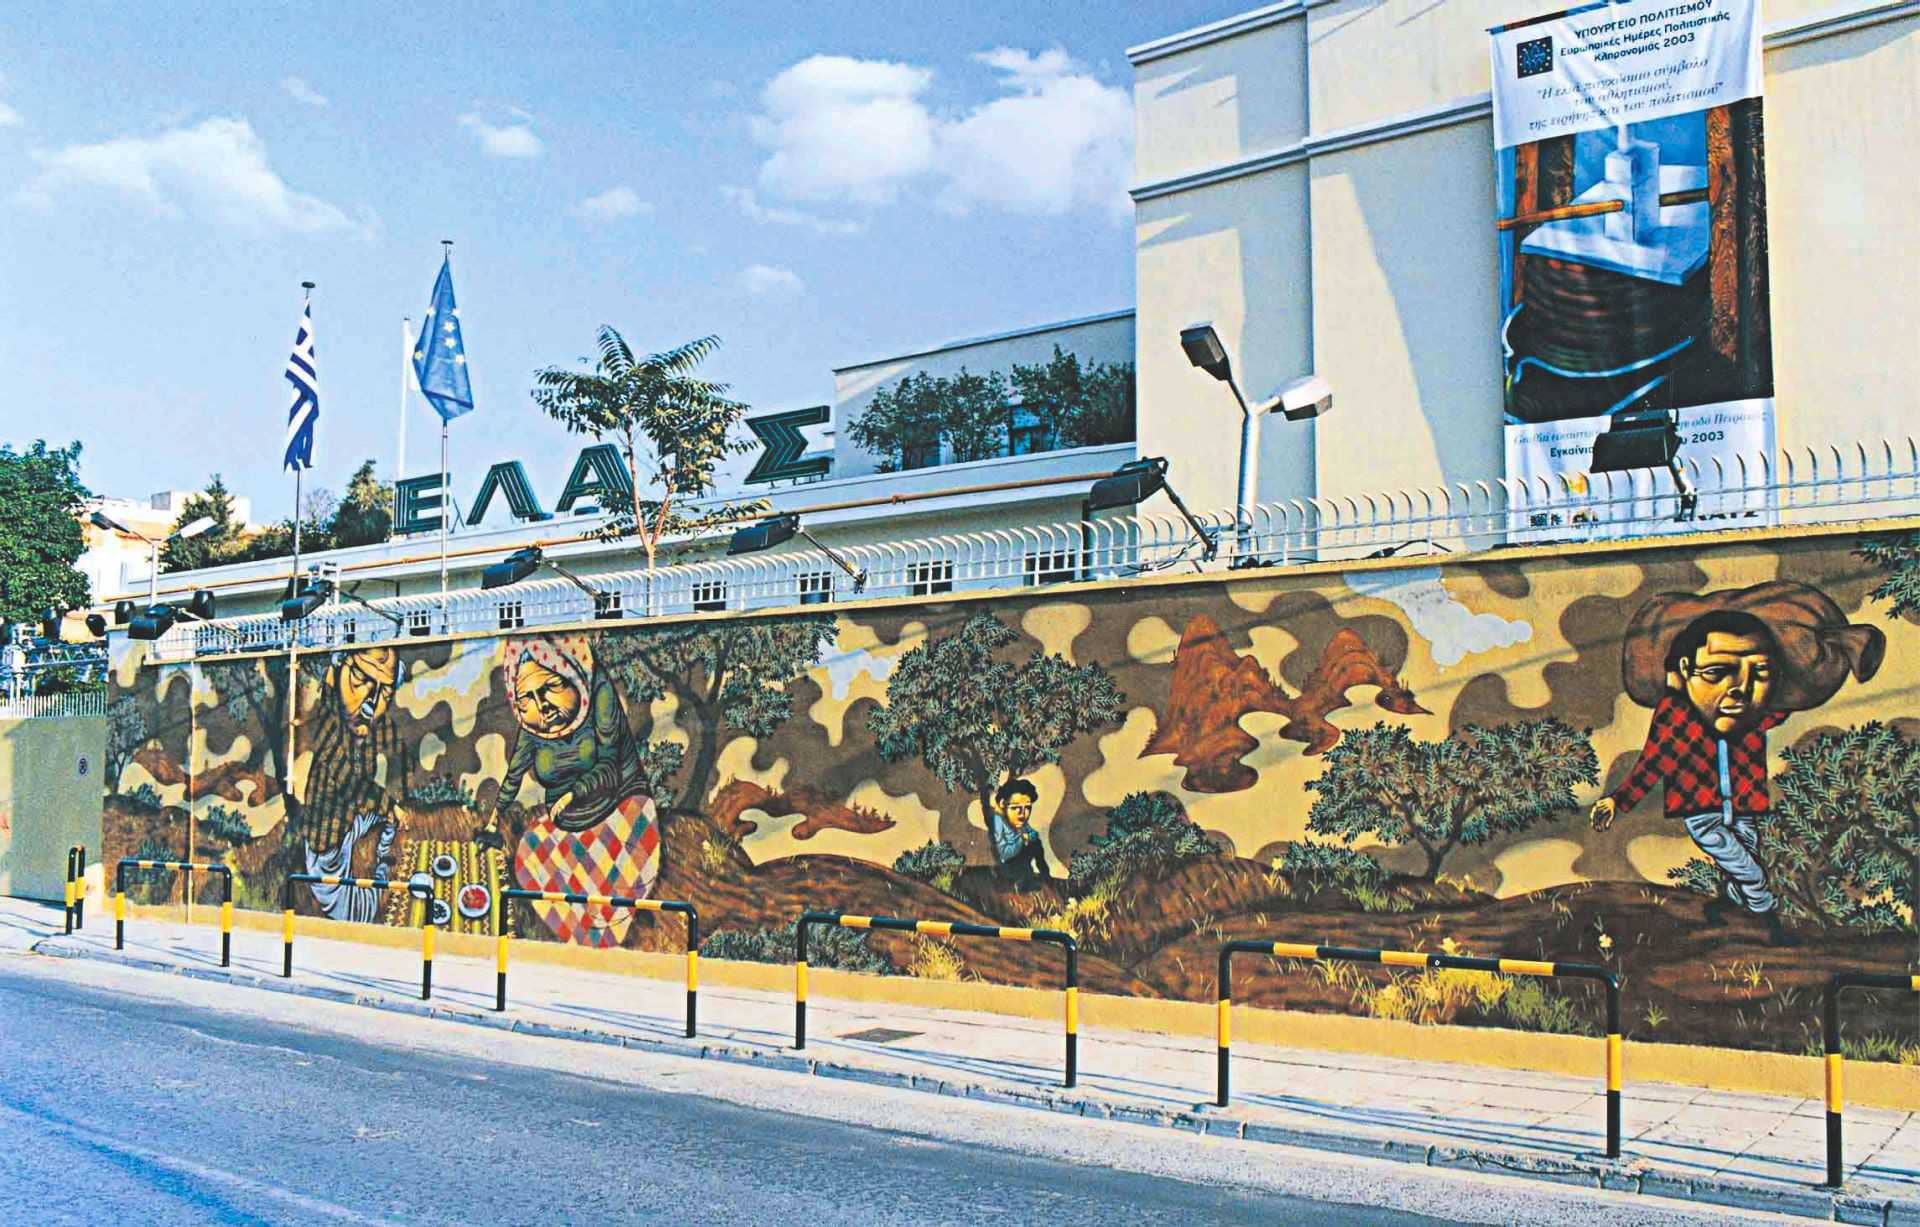 world-greek-painter-dedicates-athens-mural-to-the-history-of-olive-oil-production-olive-oil-times